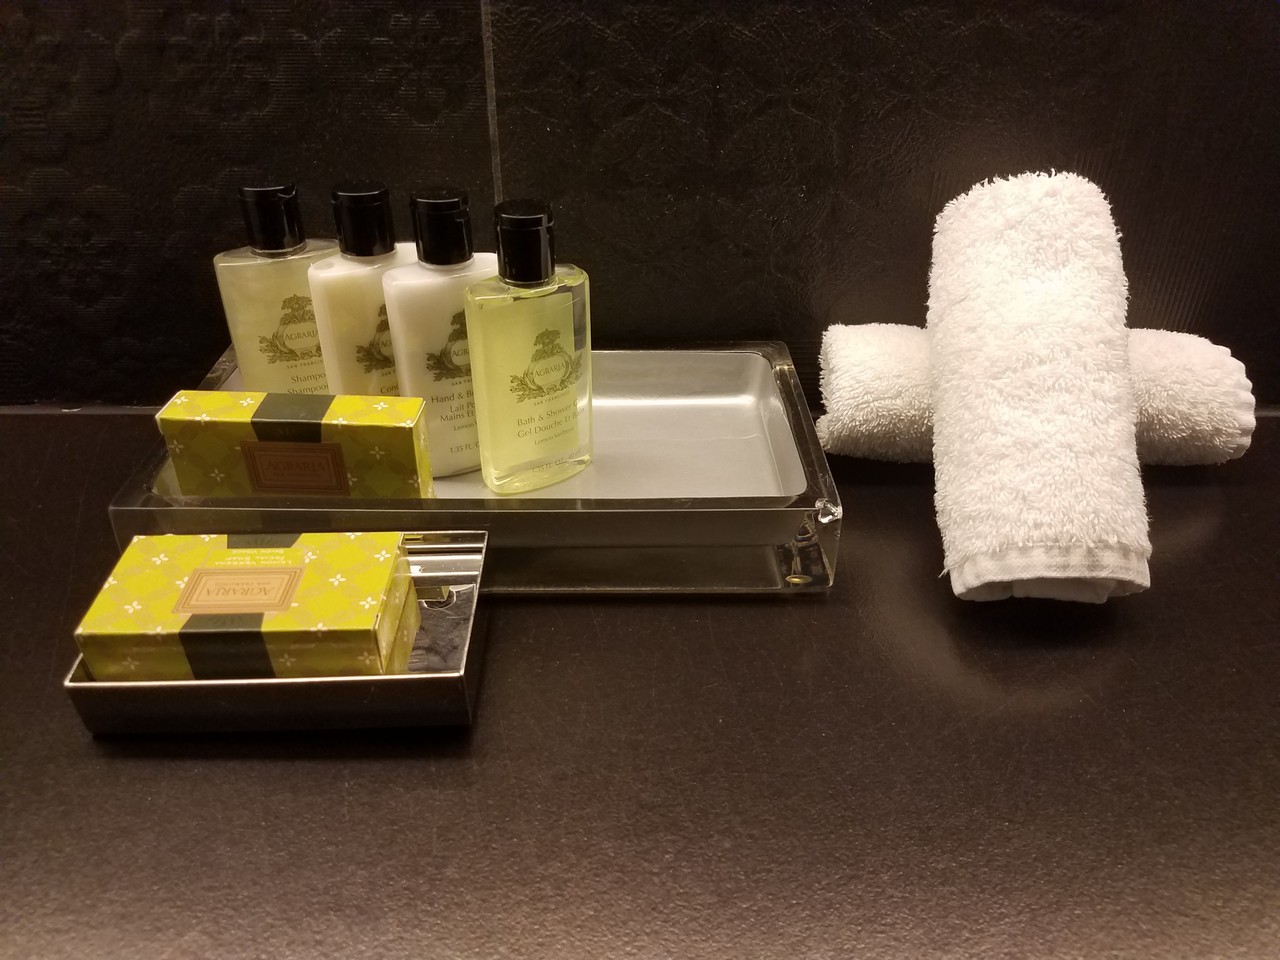 a group of bottles of shampoo and a towel on a tray